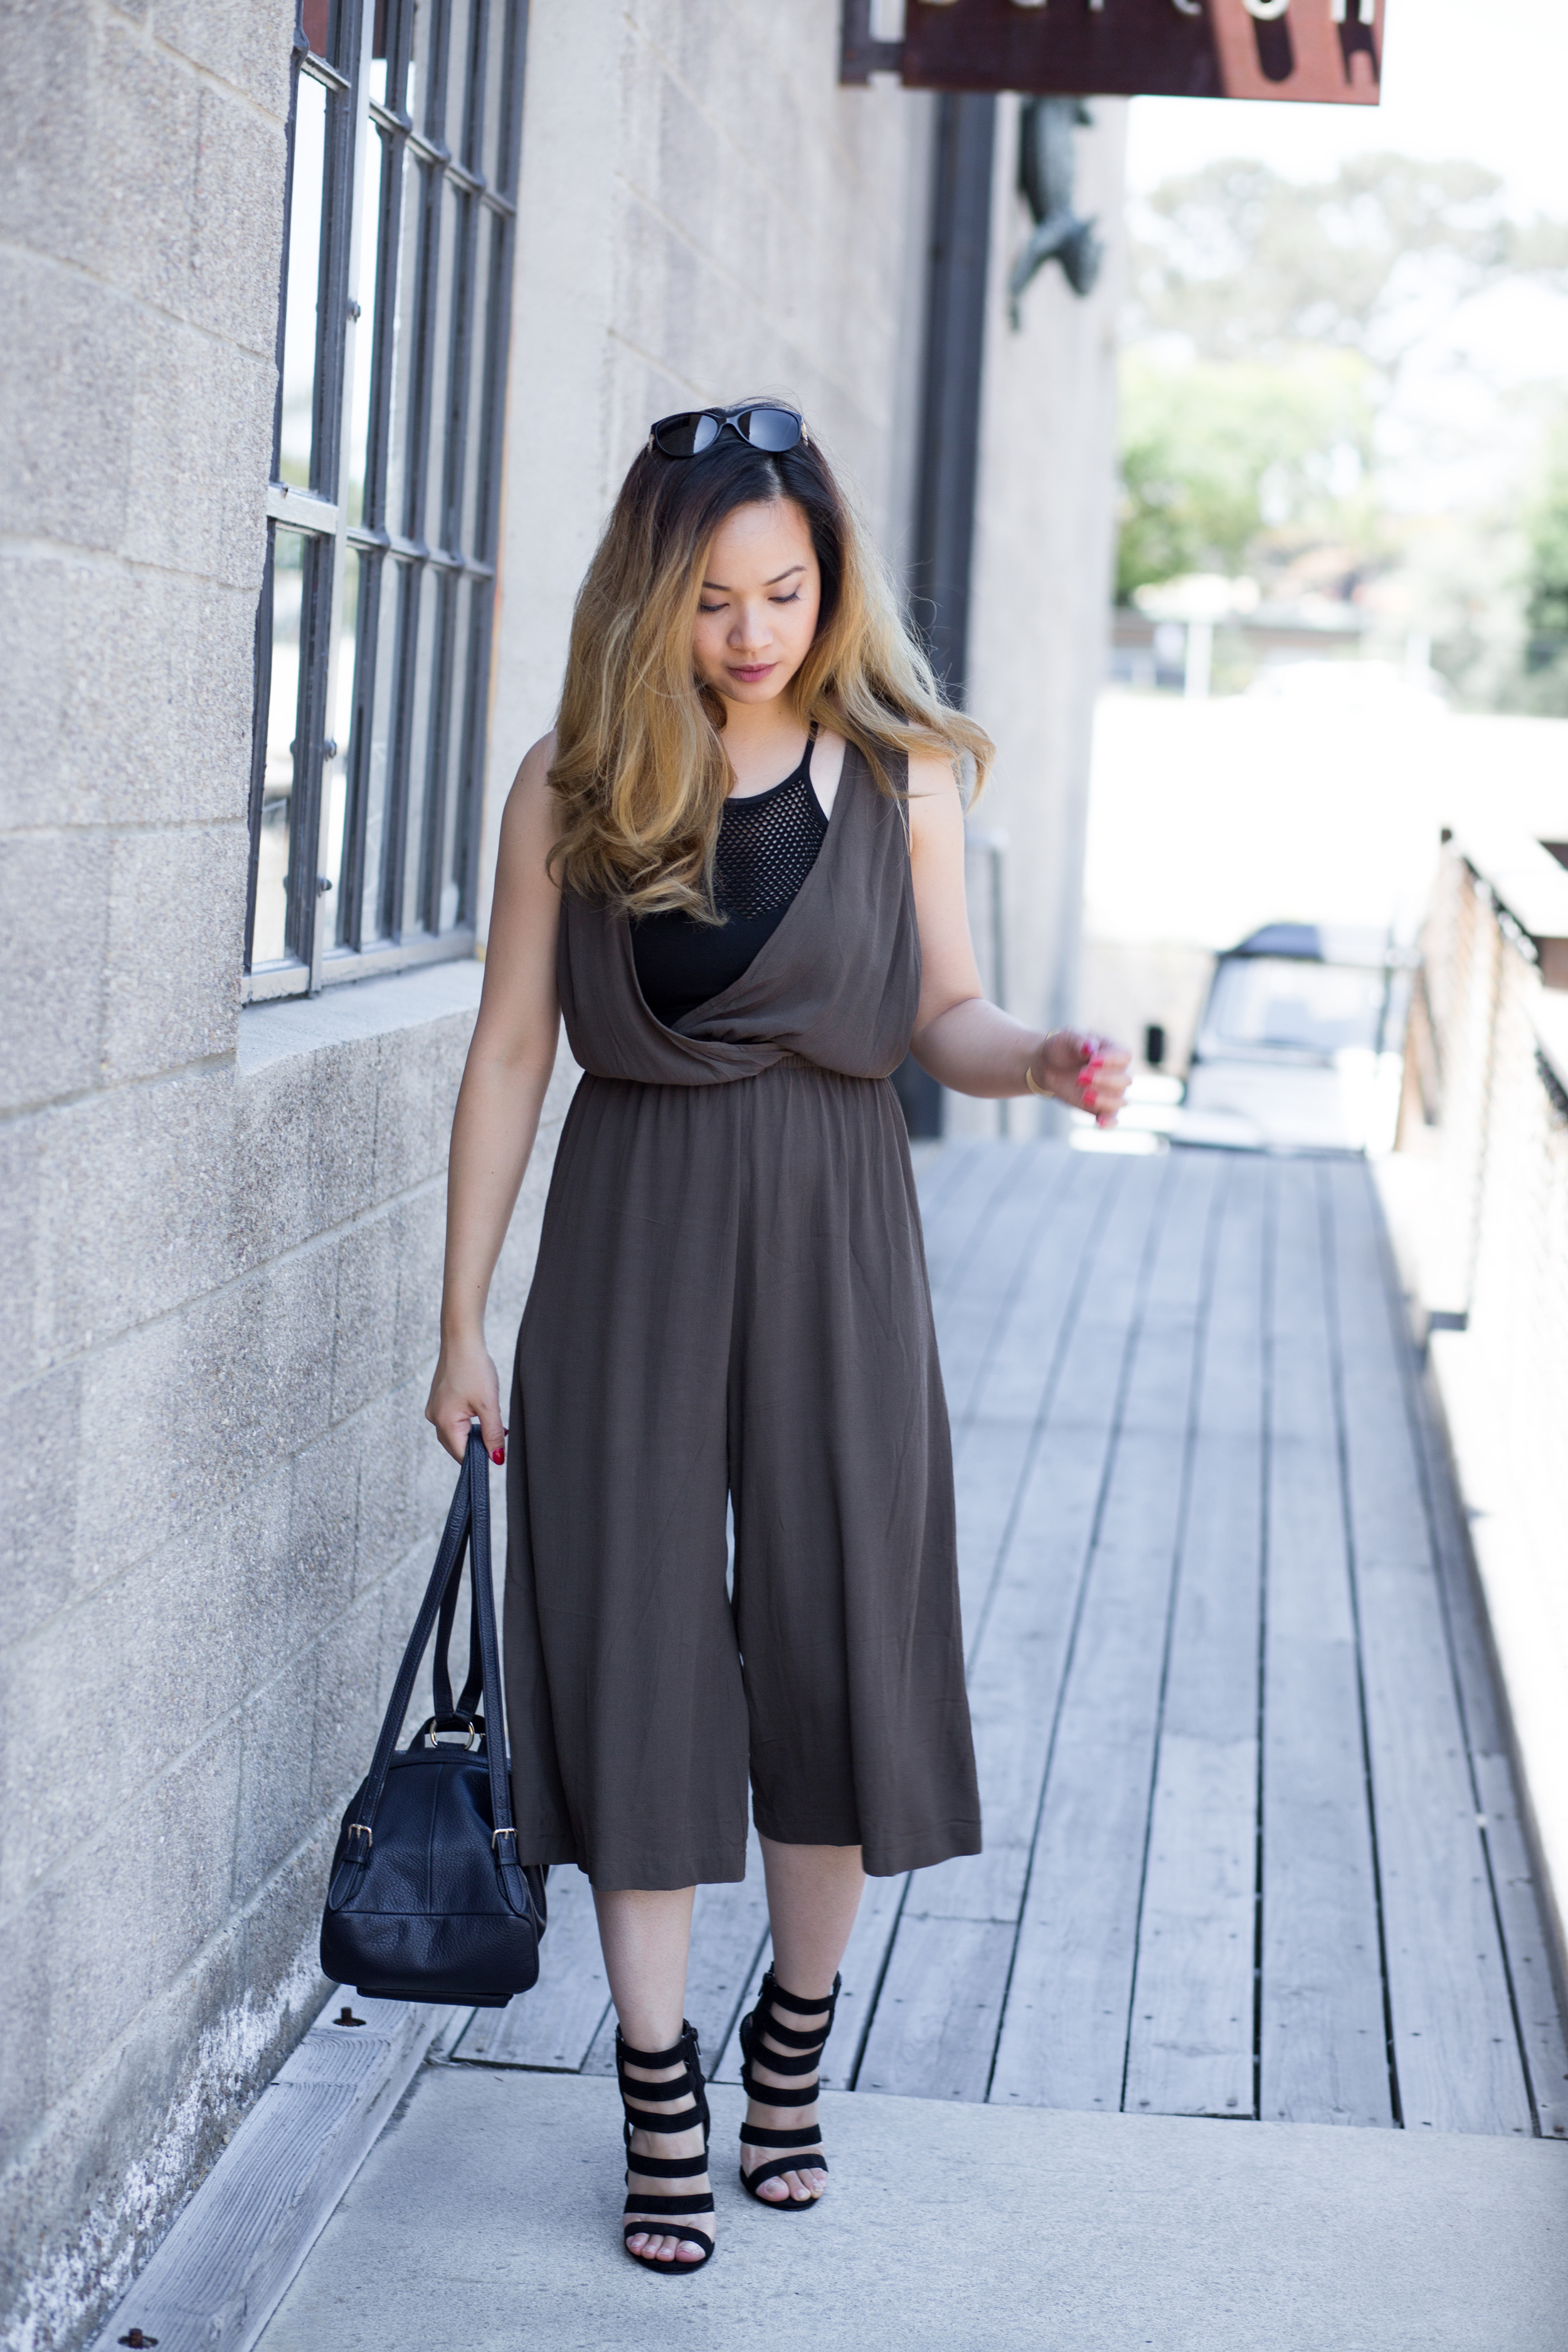 How to Look Casually Chic While Staying Cool This Summer: A Culottes + Jumpsuit Hybrid